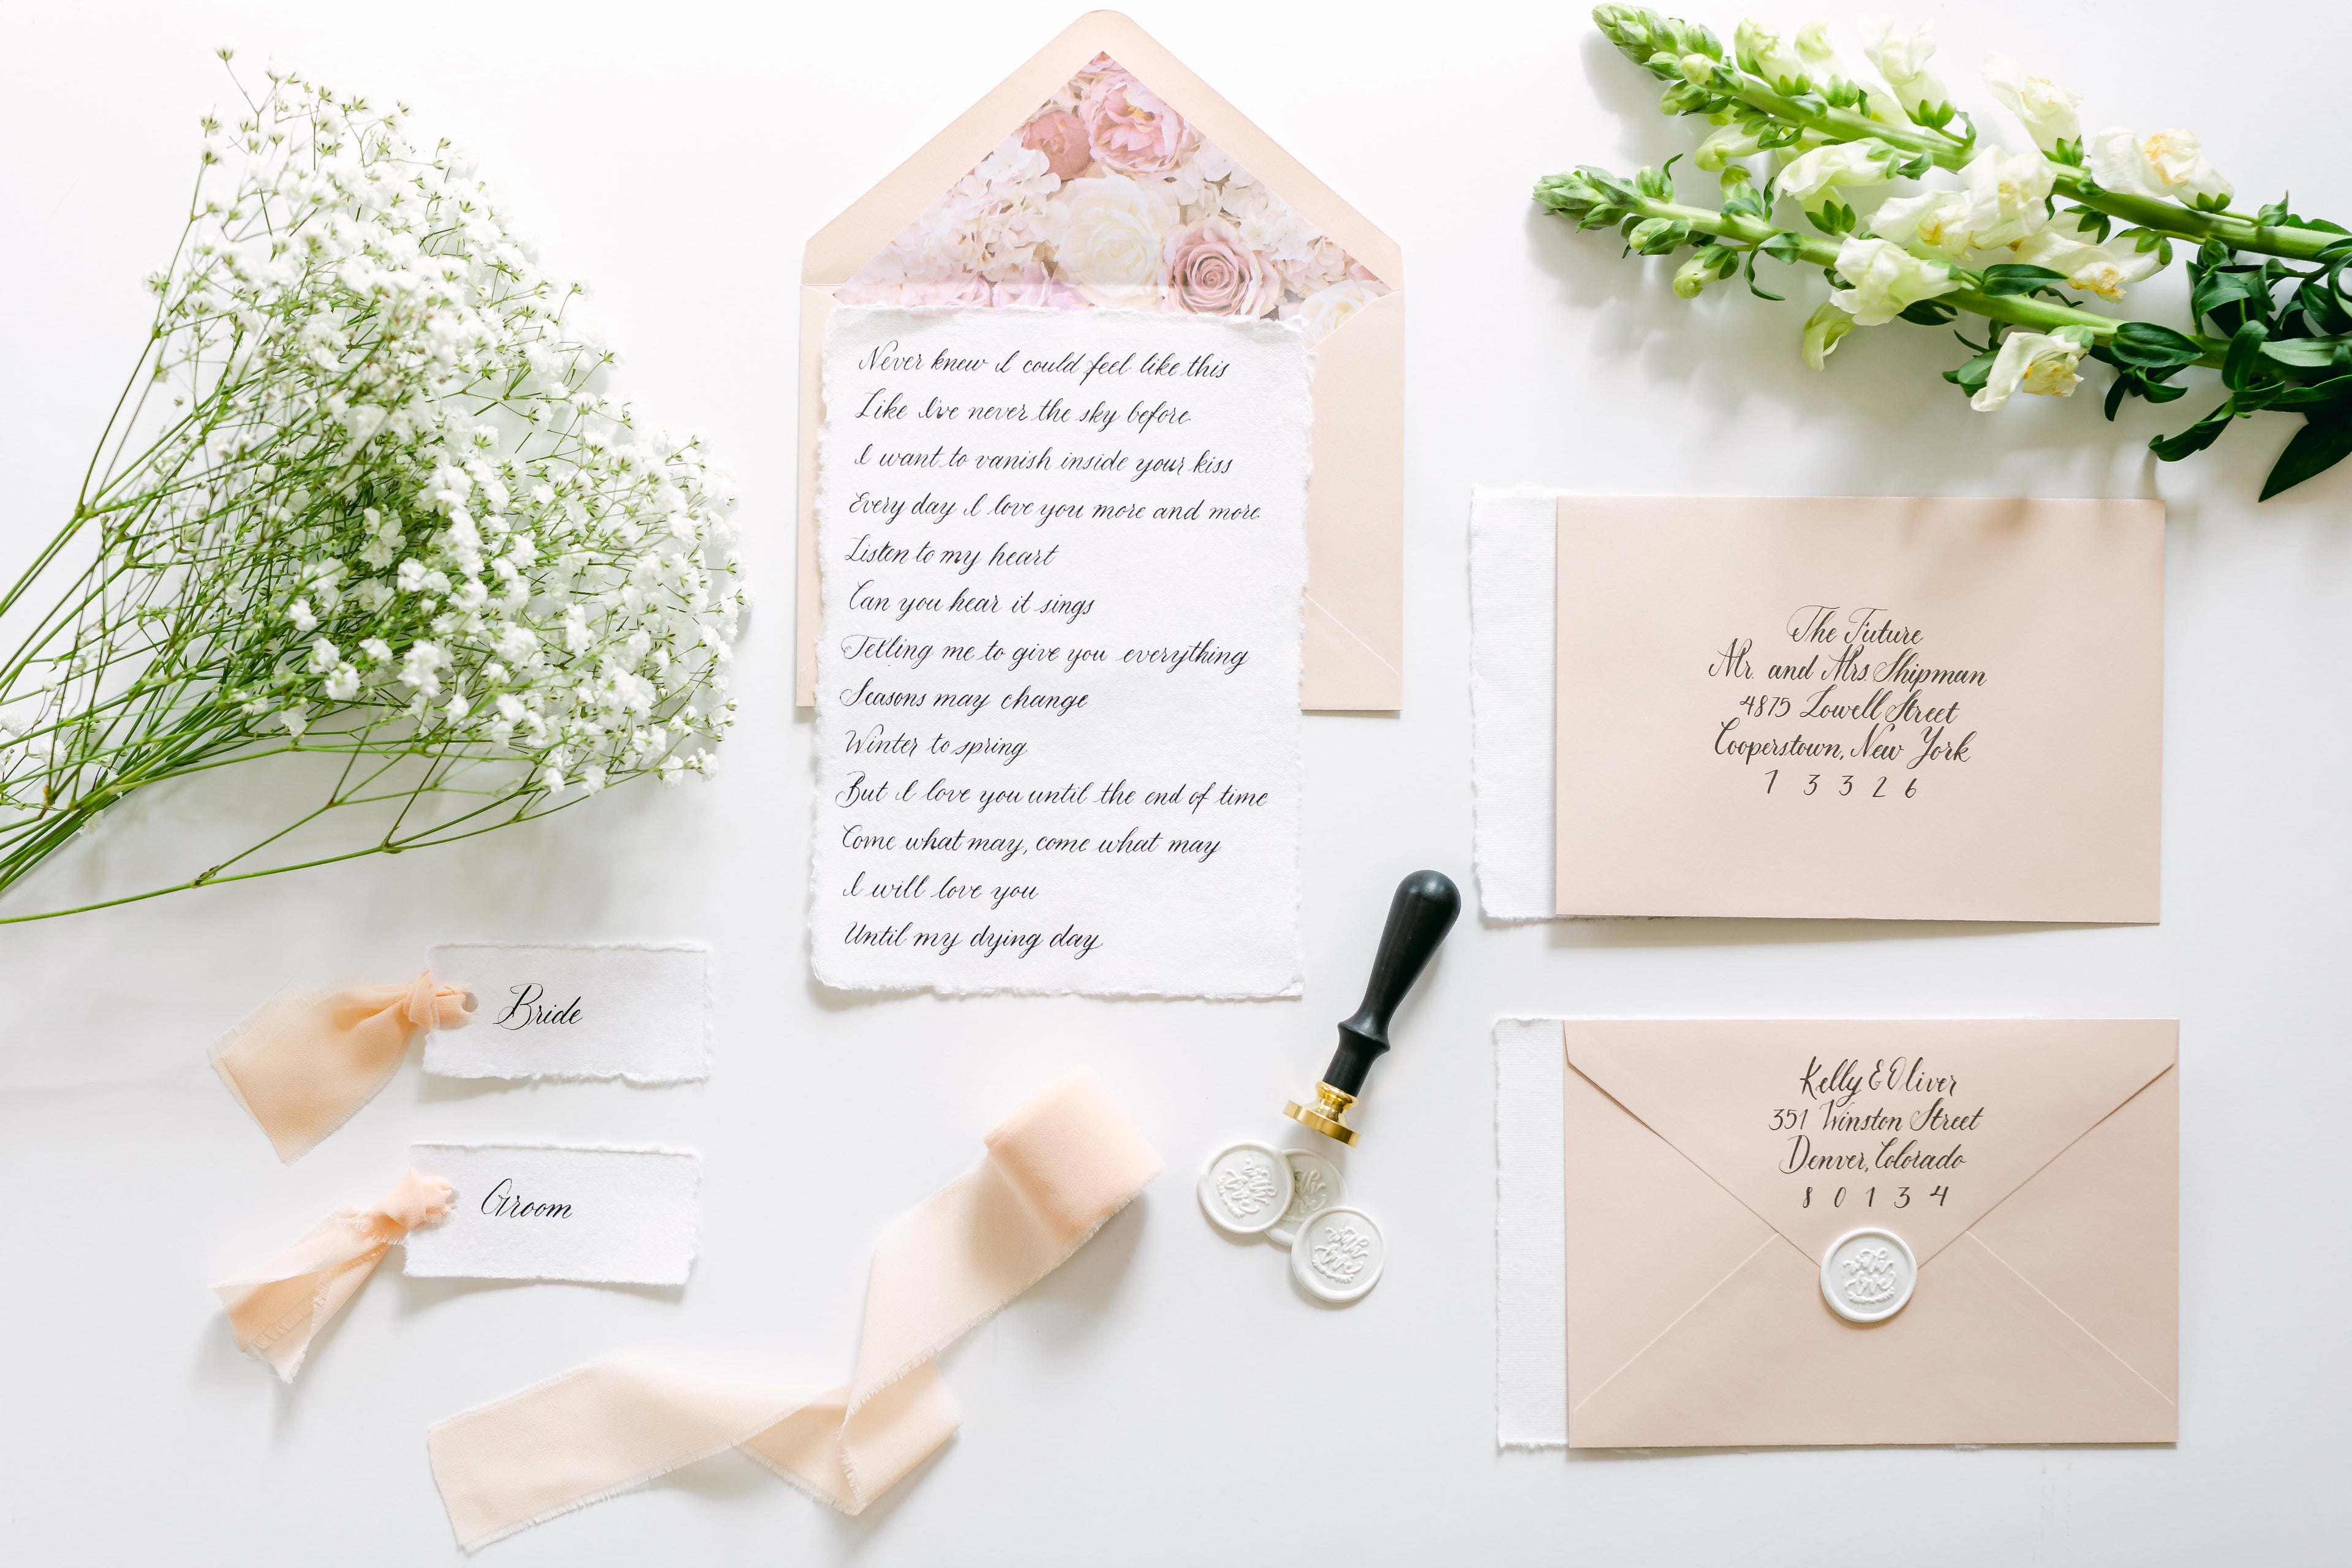 custom calligraphy suite featuring envelope calligraphy, placecard calligraphy, and scripted vows from colorado calligrapher Sparrow and Ink Designs